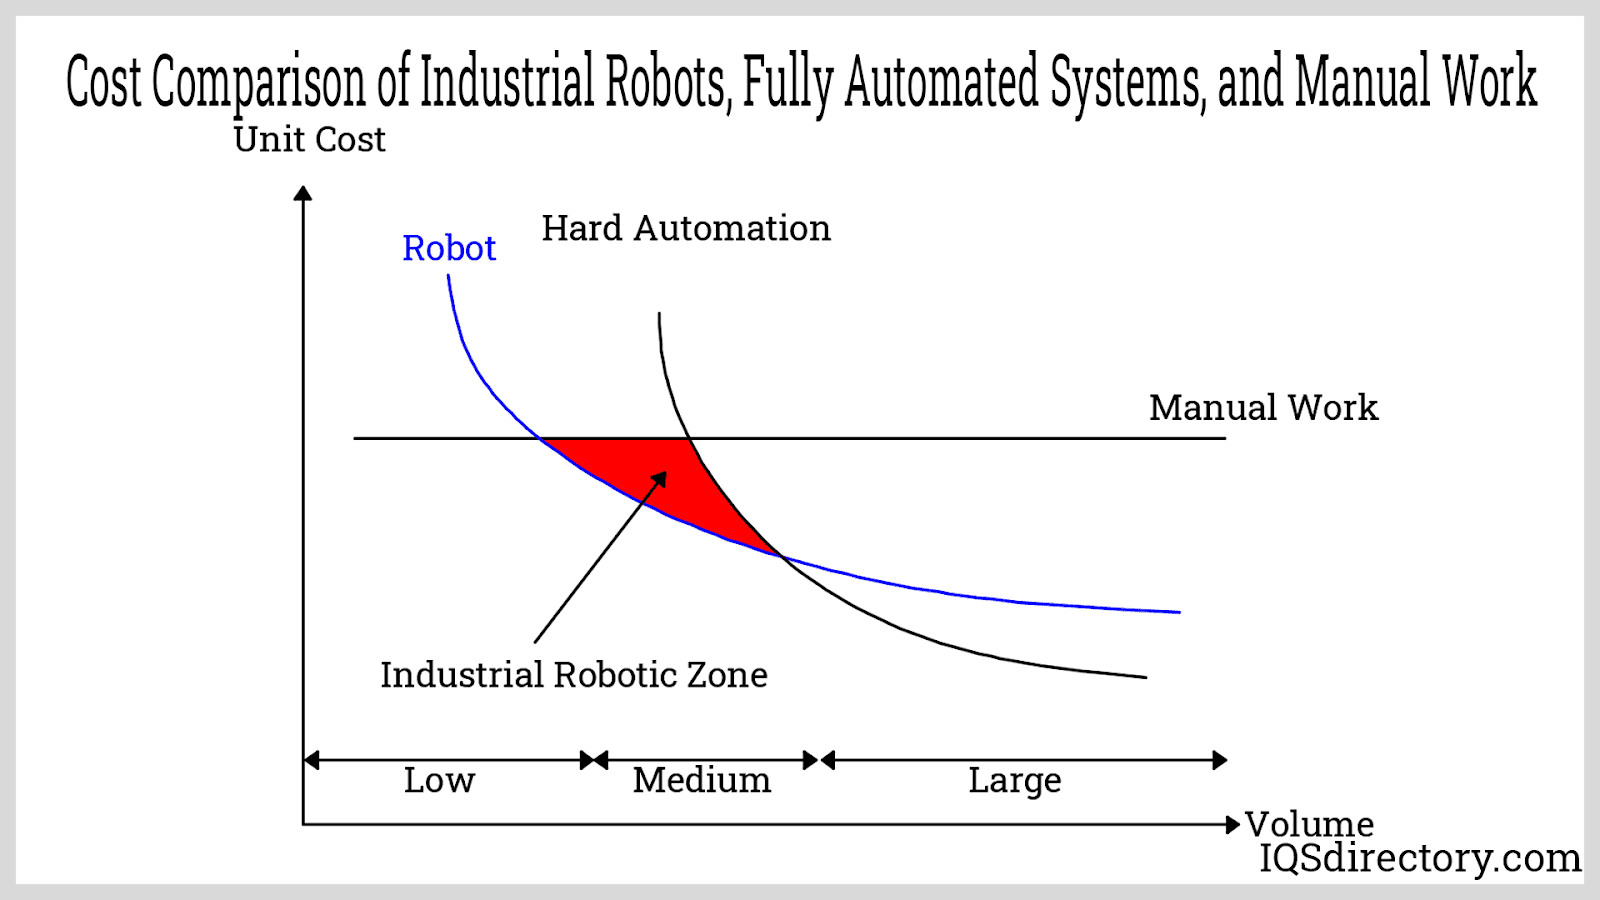 Cost Comparison of Industrial Robots, Fully Automated Systems, and Manual Work